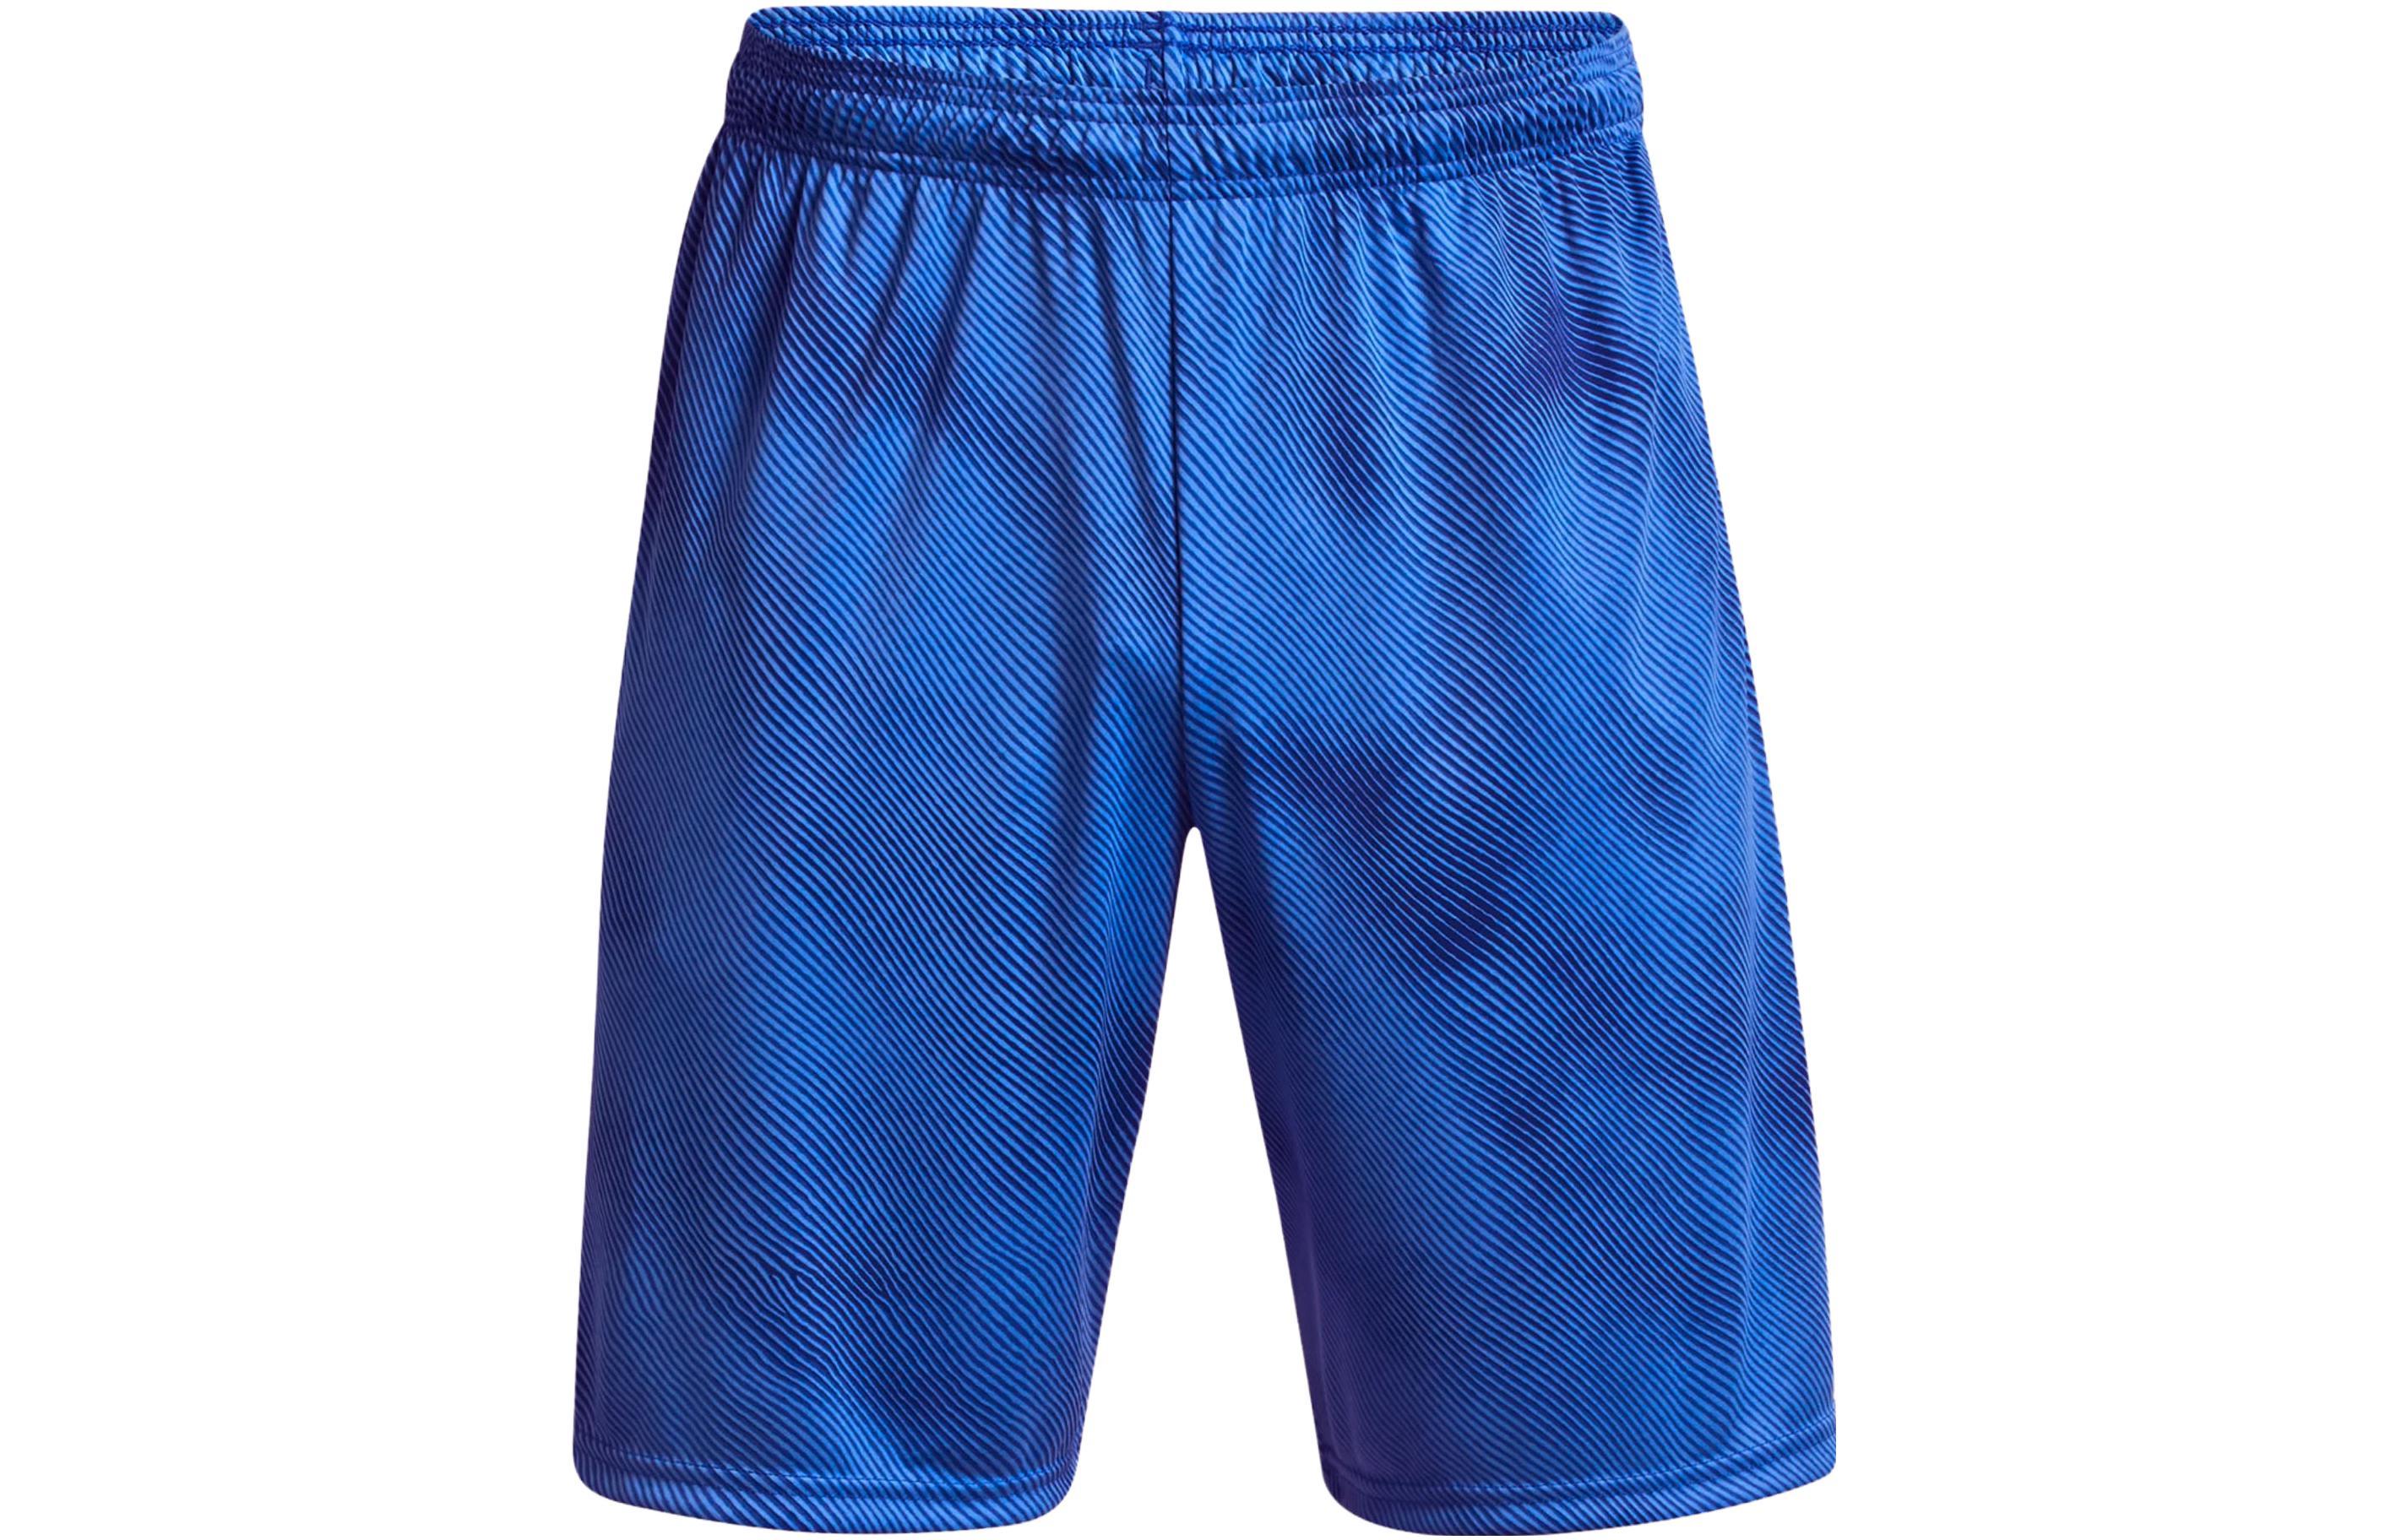 Under Armour Tech Printed Shorts